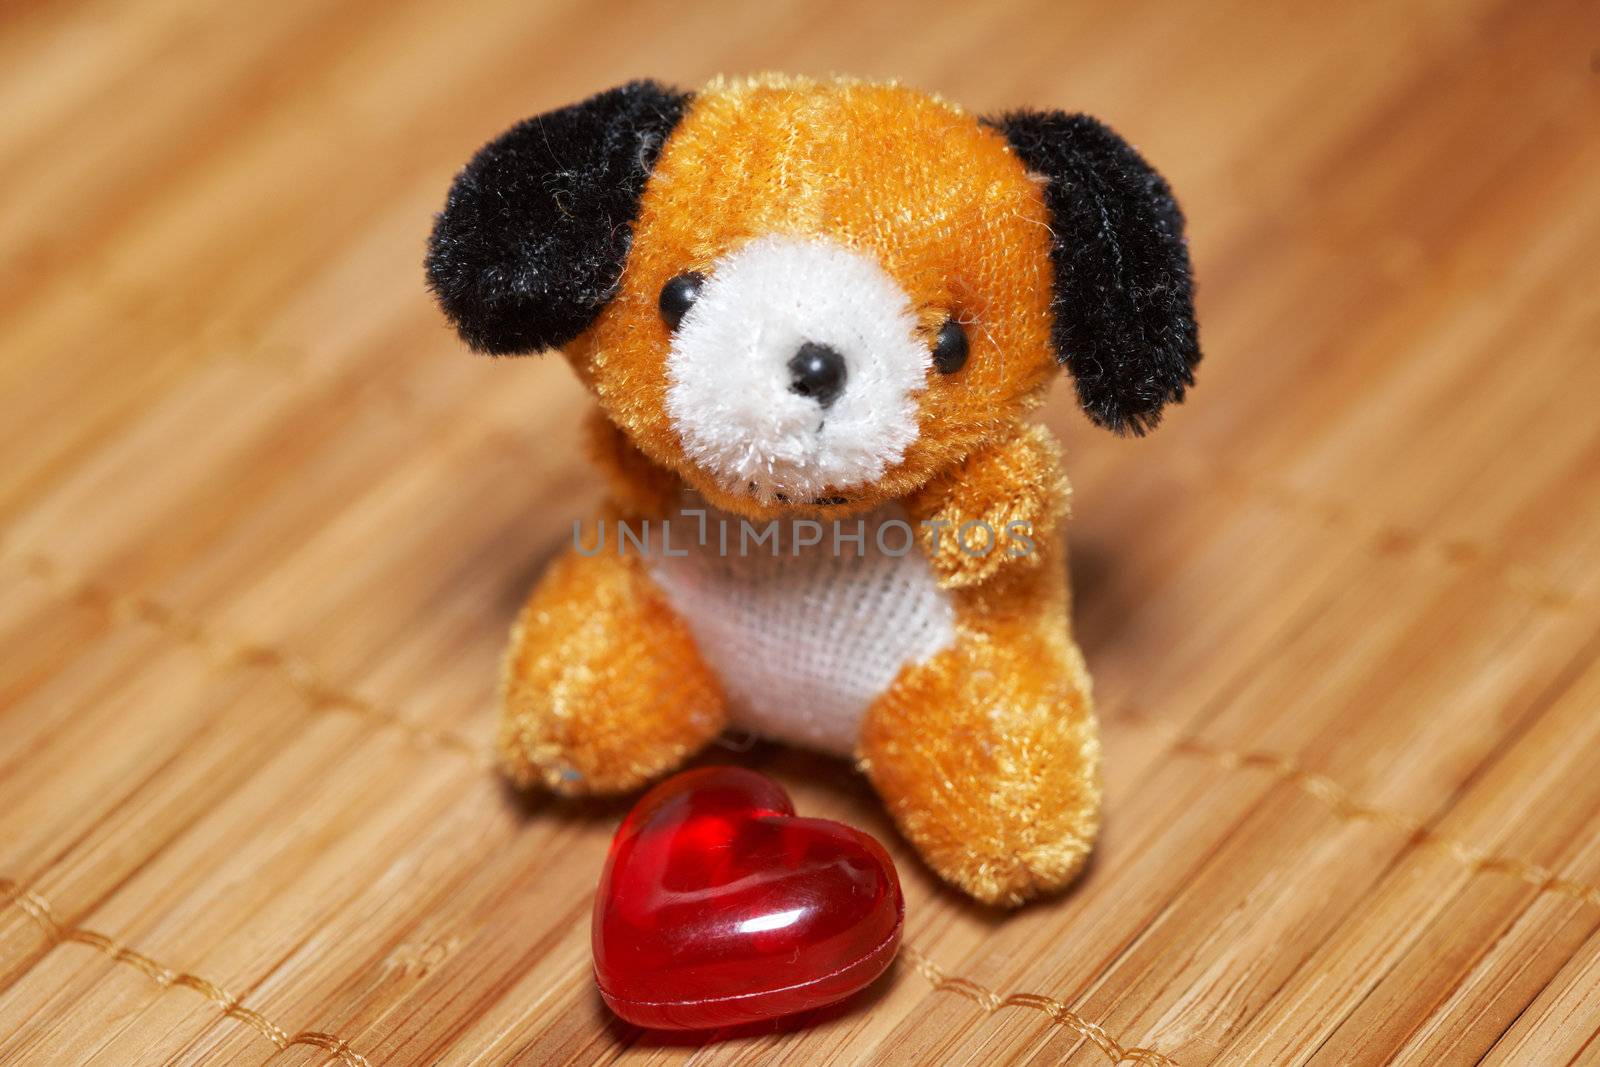 Puppy and heart by petrkurgan